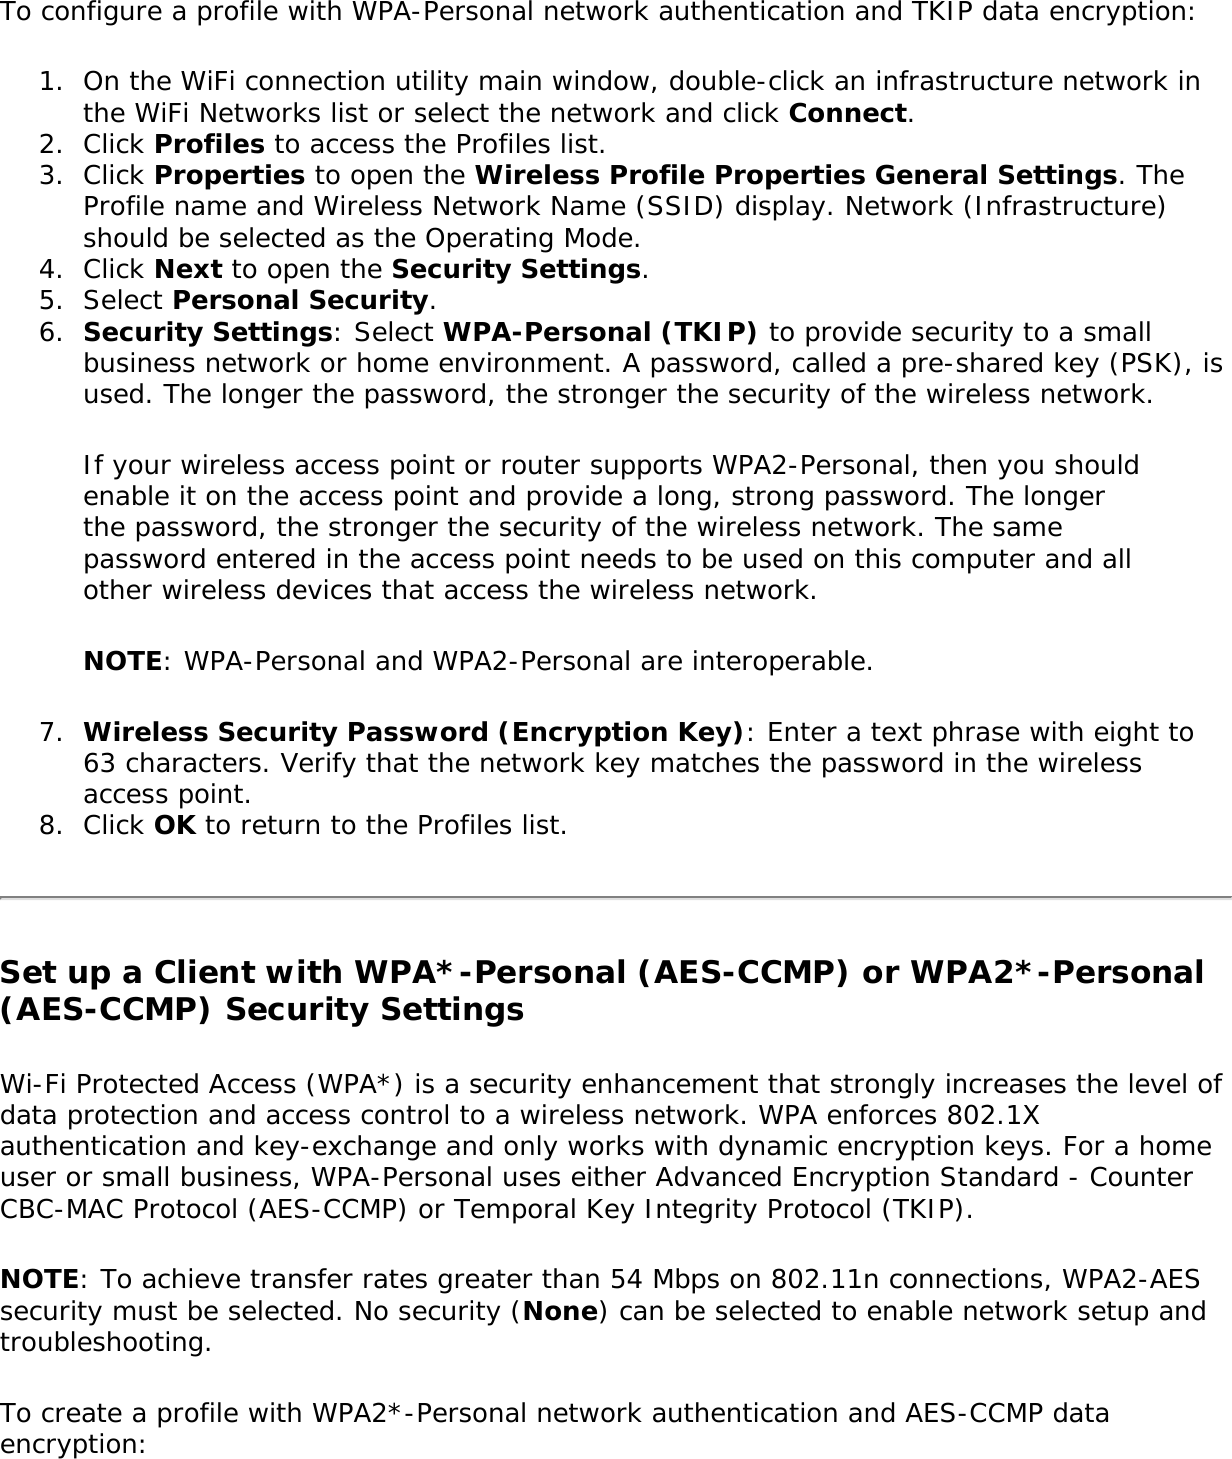 To configure a profile with WPA-Personal network authentication and TKIP data encryption:1.  On the WiFi connection utility main window, double-click an infrastructure network in the WiFi Networks list or select the network and click Connect.2.  Click Profiles to access the Profiles list.3.  Click Properties to open the Wireless Profile Properties General Settings. The Profile name and Wireless Network Name (SSID) display. Network (Infrastructure) should be selected as the Operating Mode.4.  Click Next to open the Security Settings. 5.  Select Personal Security.6.  Security Settings: Select WPA-Personal (TKIP) to provide security to a small business network or home environment. A password, called a pre-shared key (PSK), is used. The longer the password, the stronger the security of the wireless network.If your wireless access point or router supports WPA2-Personal, then you should enable it on the access point and provide a long, strong password. The longer the password, the stronger the security of the wireless network. The same password entered in the access point needs to be used on this computer and all other wireless devices that access the wireless network.NOTE: WPA-Personal and WPA2-Personal are interoperable.7.  Wireless Security Password (Encryption Key): Enter a text phrase with eight to 63 characters. Verify that the network key matches the password in the wireless access point.8.  Click OK to return to the Profiles list.Set up a Client with WPA*-Personal (AES-CCMP) or WPA2*-Personal (AES-CCMP) Security SettingsWi-Fi Protected Access (WPA*) is a security enhancement that strongly increases the level of data protection and access control to a wireless network. WPA enforces 802.1X authentication and key-exchange and only works with dynamic encryption keys. For a home user or small business, WPA-Personal uses either Advanced Encryption Standard - Counter CBC-MAC Protocol (AES-CCMP) or Temporal Key Integrity Protocol (TKIP).NOTE: To achieve transfer rates greater than 54 Mbps on 802.11n connections, WPA2-AES security must be selected. No security (None) can be selected to enable network setup and troubleshooting.To create a profile with WPA2*-Personal network authentication and AES-CCMP data encryption: